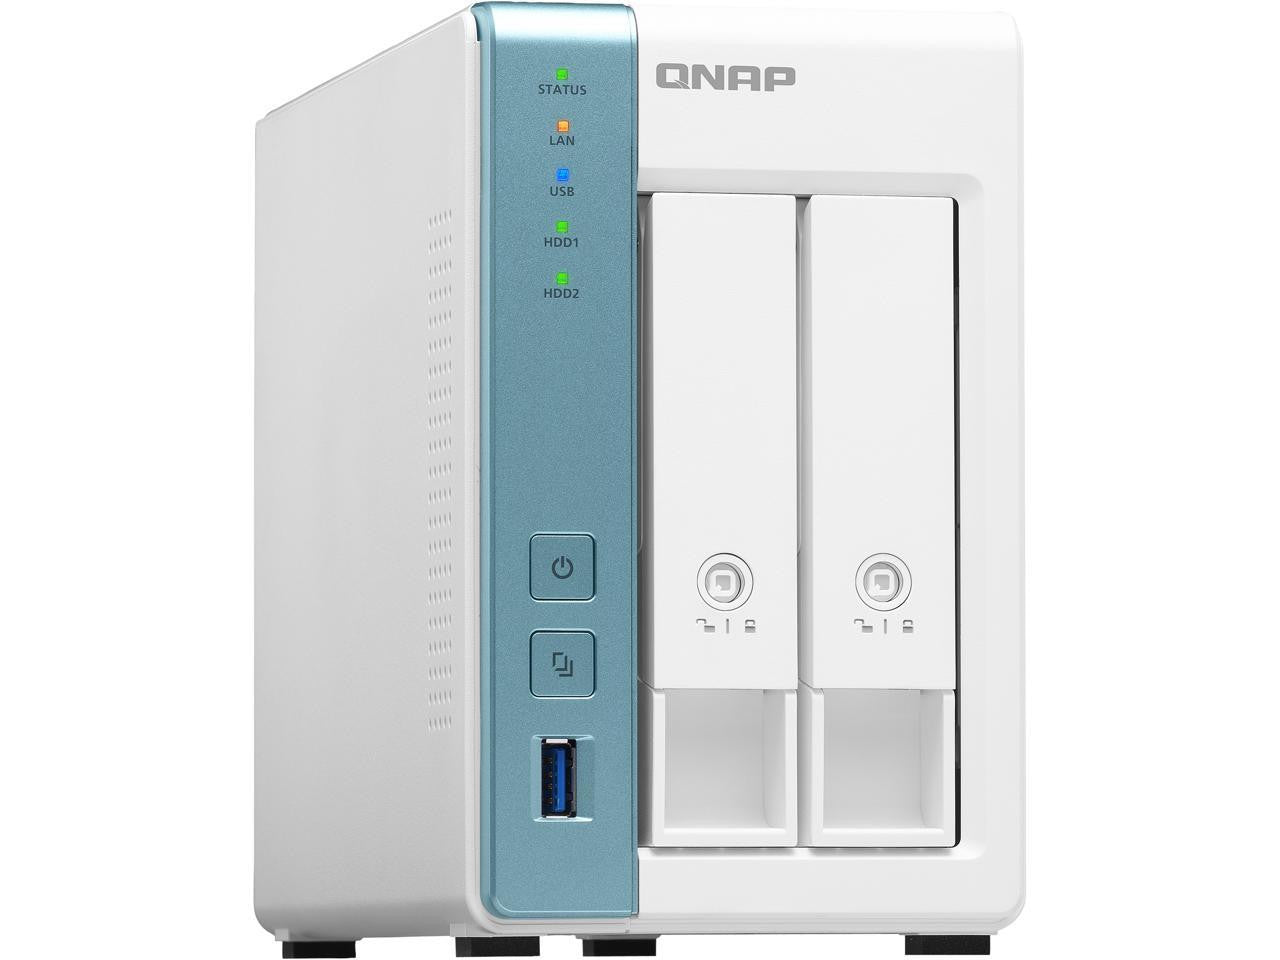 QNAP TS-231K 2-Bay Home NAS with 4TB (2 x 2TB) of Western Digital Red Plus Drives Fully Assembled and Tested